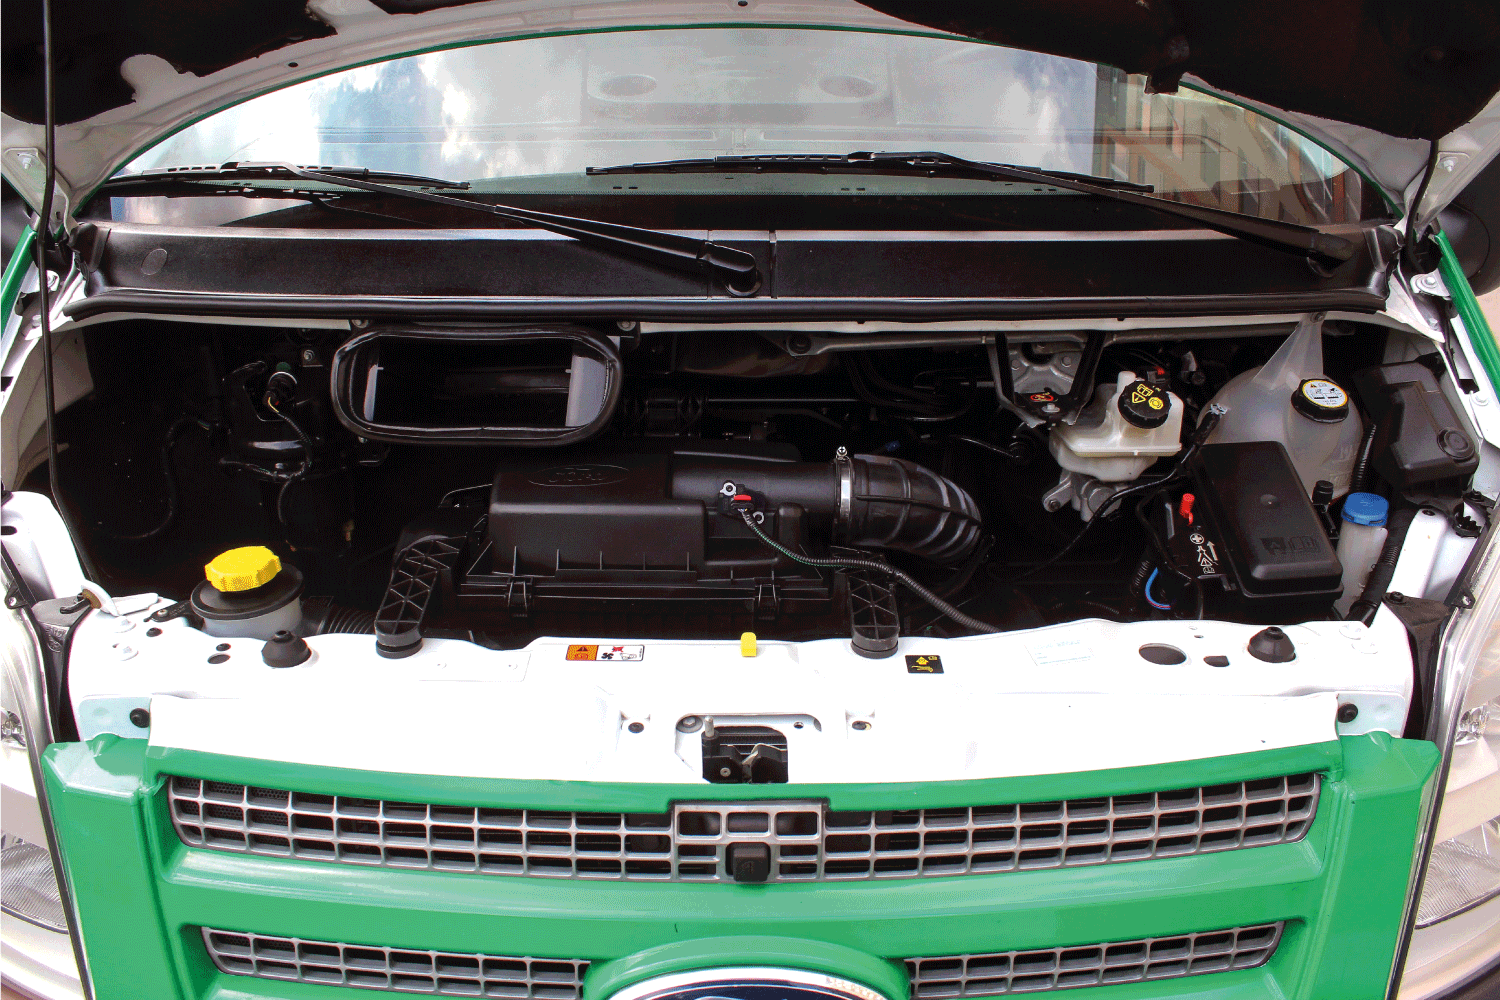 open hood of the engine bay of Ford vehicle